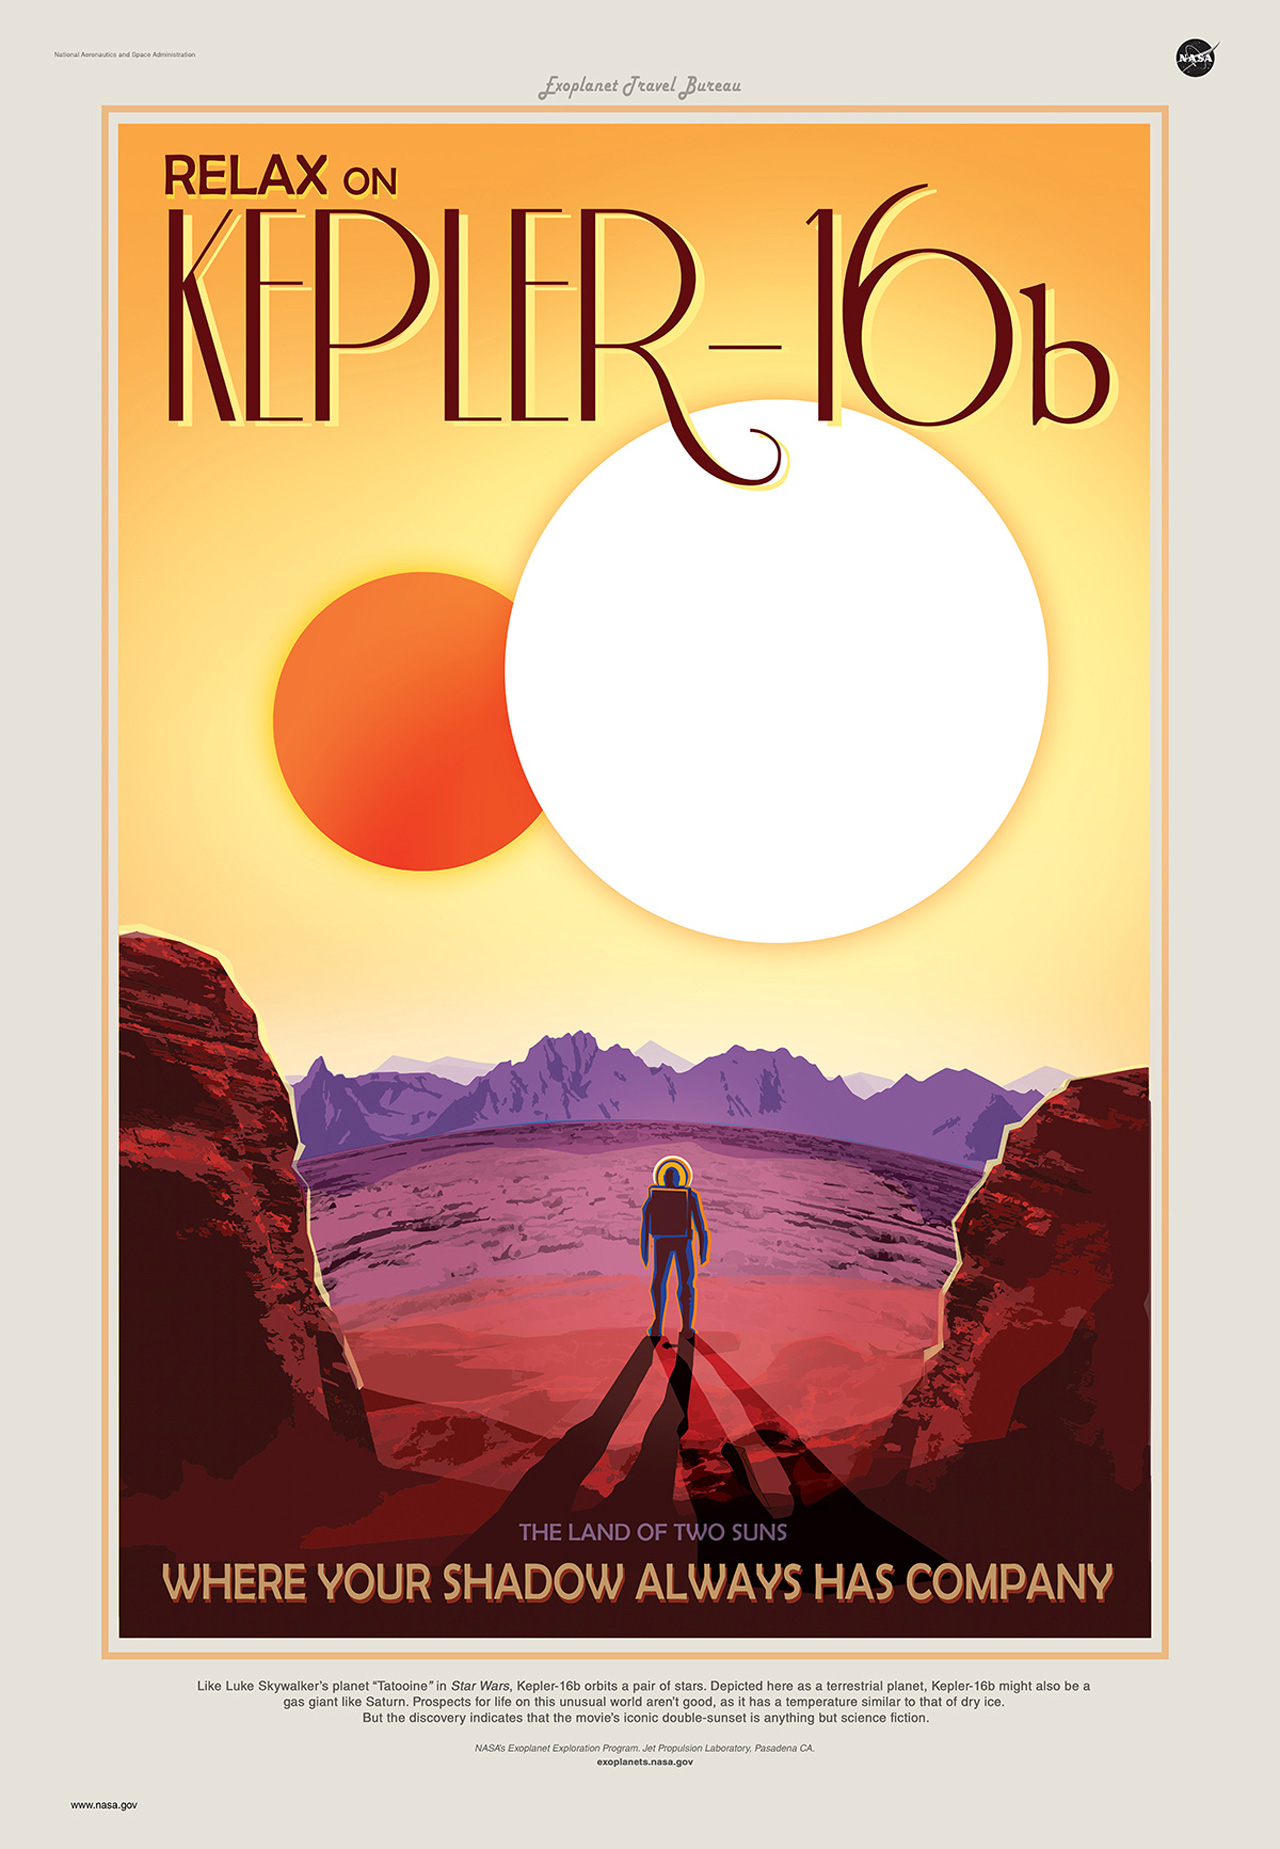 A retro looking travel poster for the exoplanet Kepler-16b shows a human standing on a rocky world with two suns large in the foreground. There is a larger white-yellowish sun, with a smaller orang sun. The person, seen from behind, has two criss-crossing shadows between an outcropping of rocks, reminiscent of the American Southwest. Like Luke Skywalker's planet "Tatooine" in Star Wars, Kepler-16b orbits a pair of stars. Kepler-16b is a gas giant, like Saturn, so it would have no solid surface to stand on. The view here is of and from an imagined nearby moon. Prospects for life on this unusual world aren't good, as it has a temperature similar to that of dry ice.